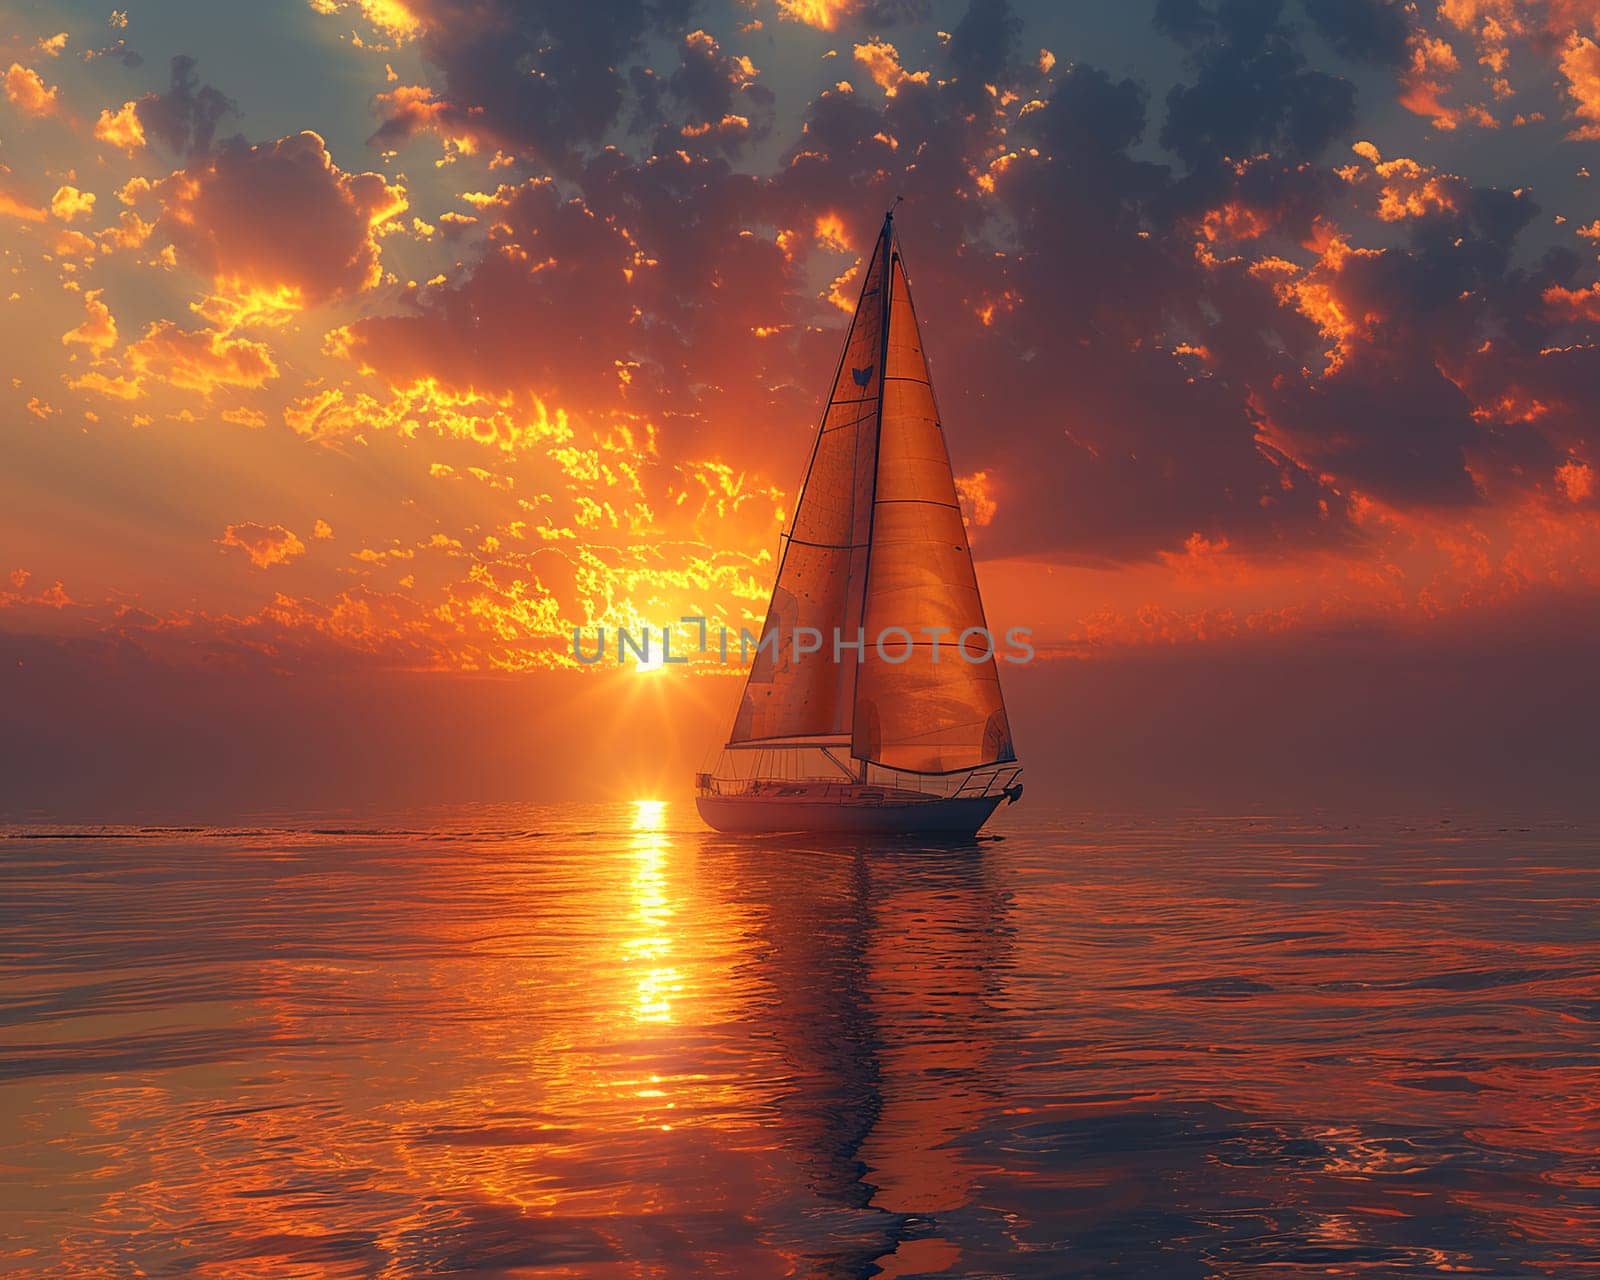 Sailboat on a calm sea at sunset, illustrating peace and adventure